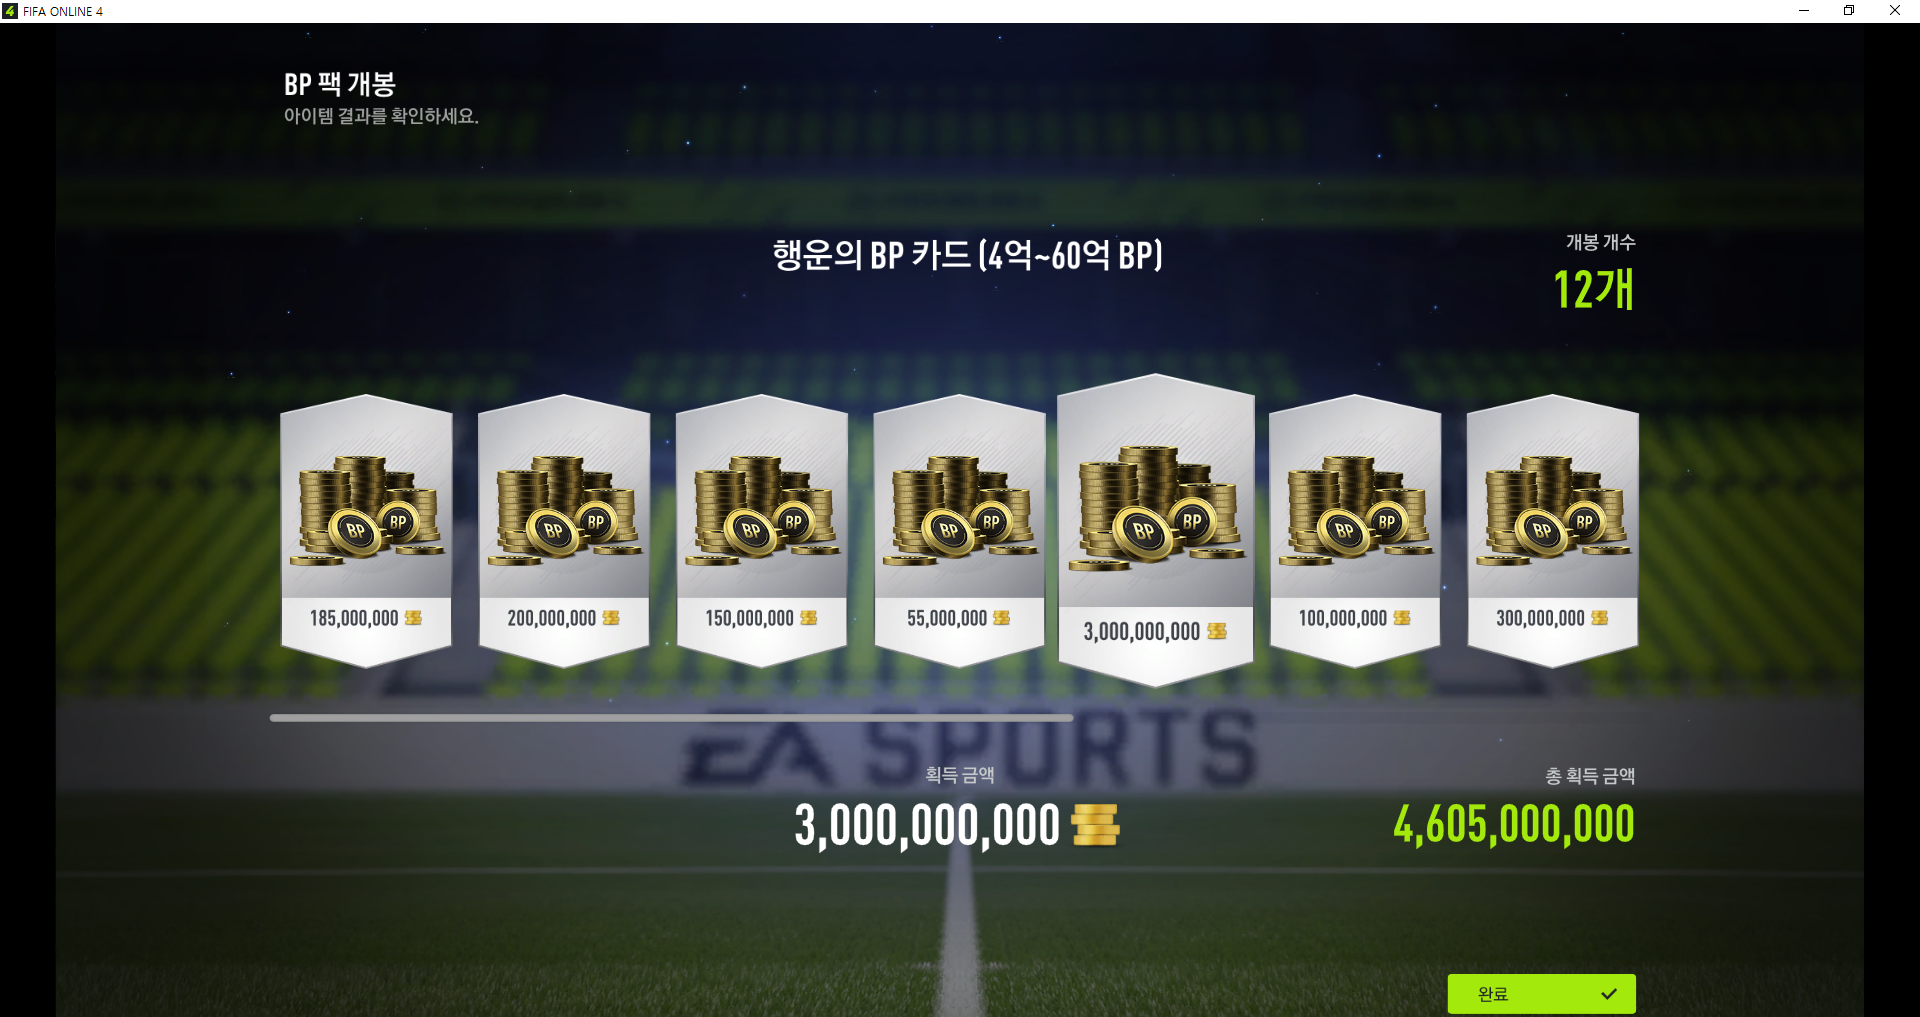 FIFA ONLINE 4 2023-04-07 오전 9_38_44.png